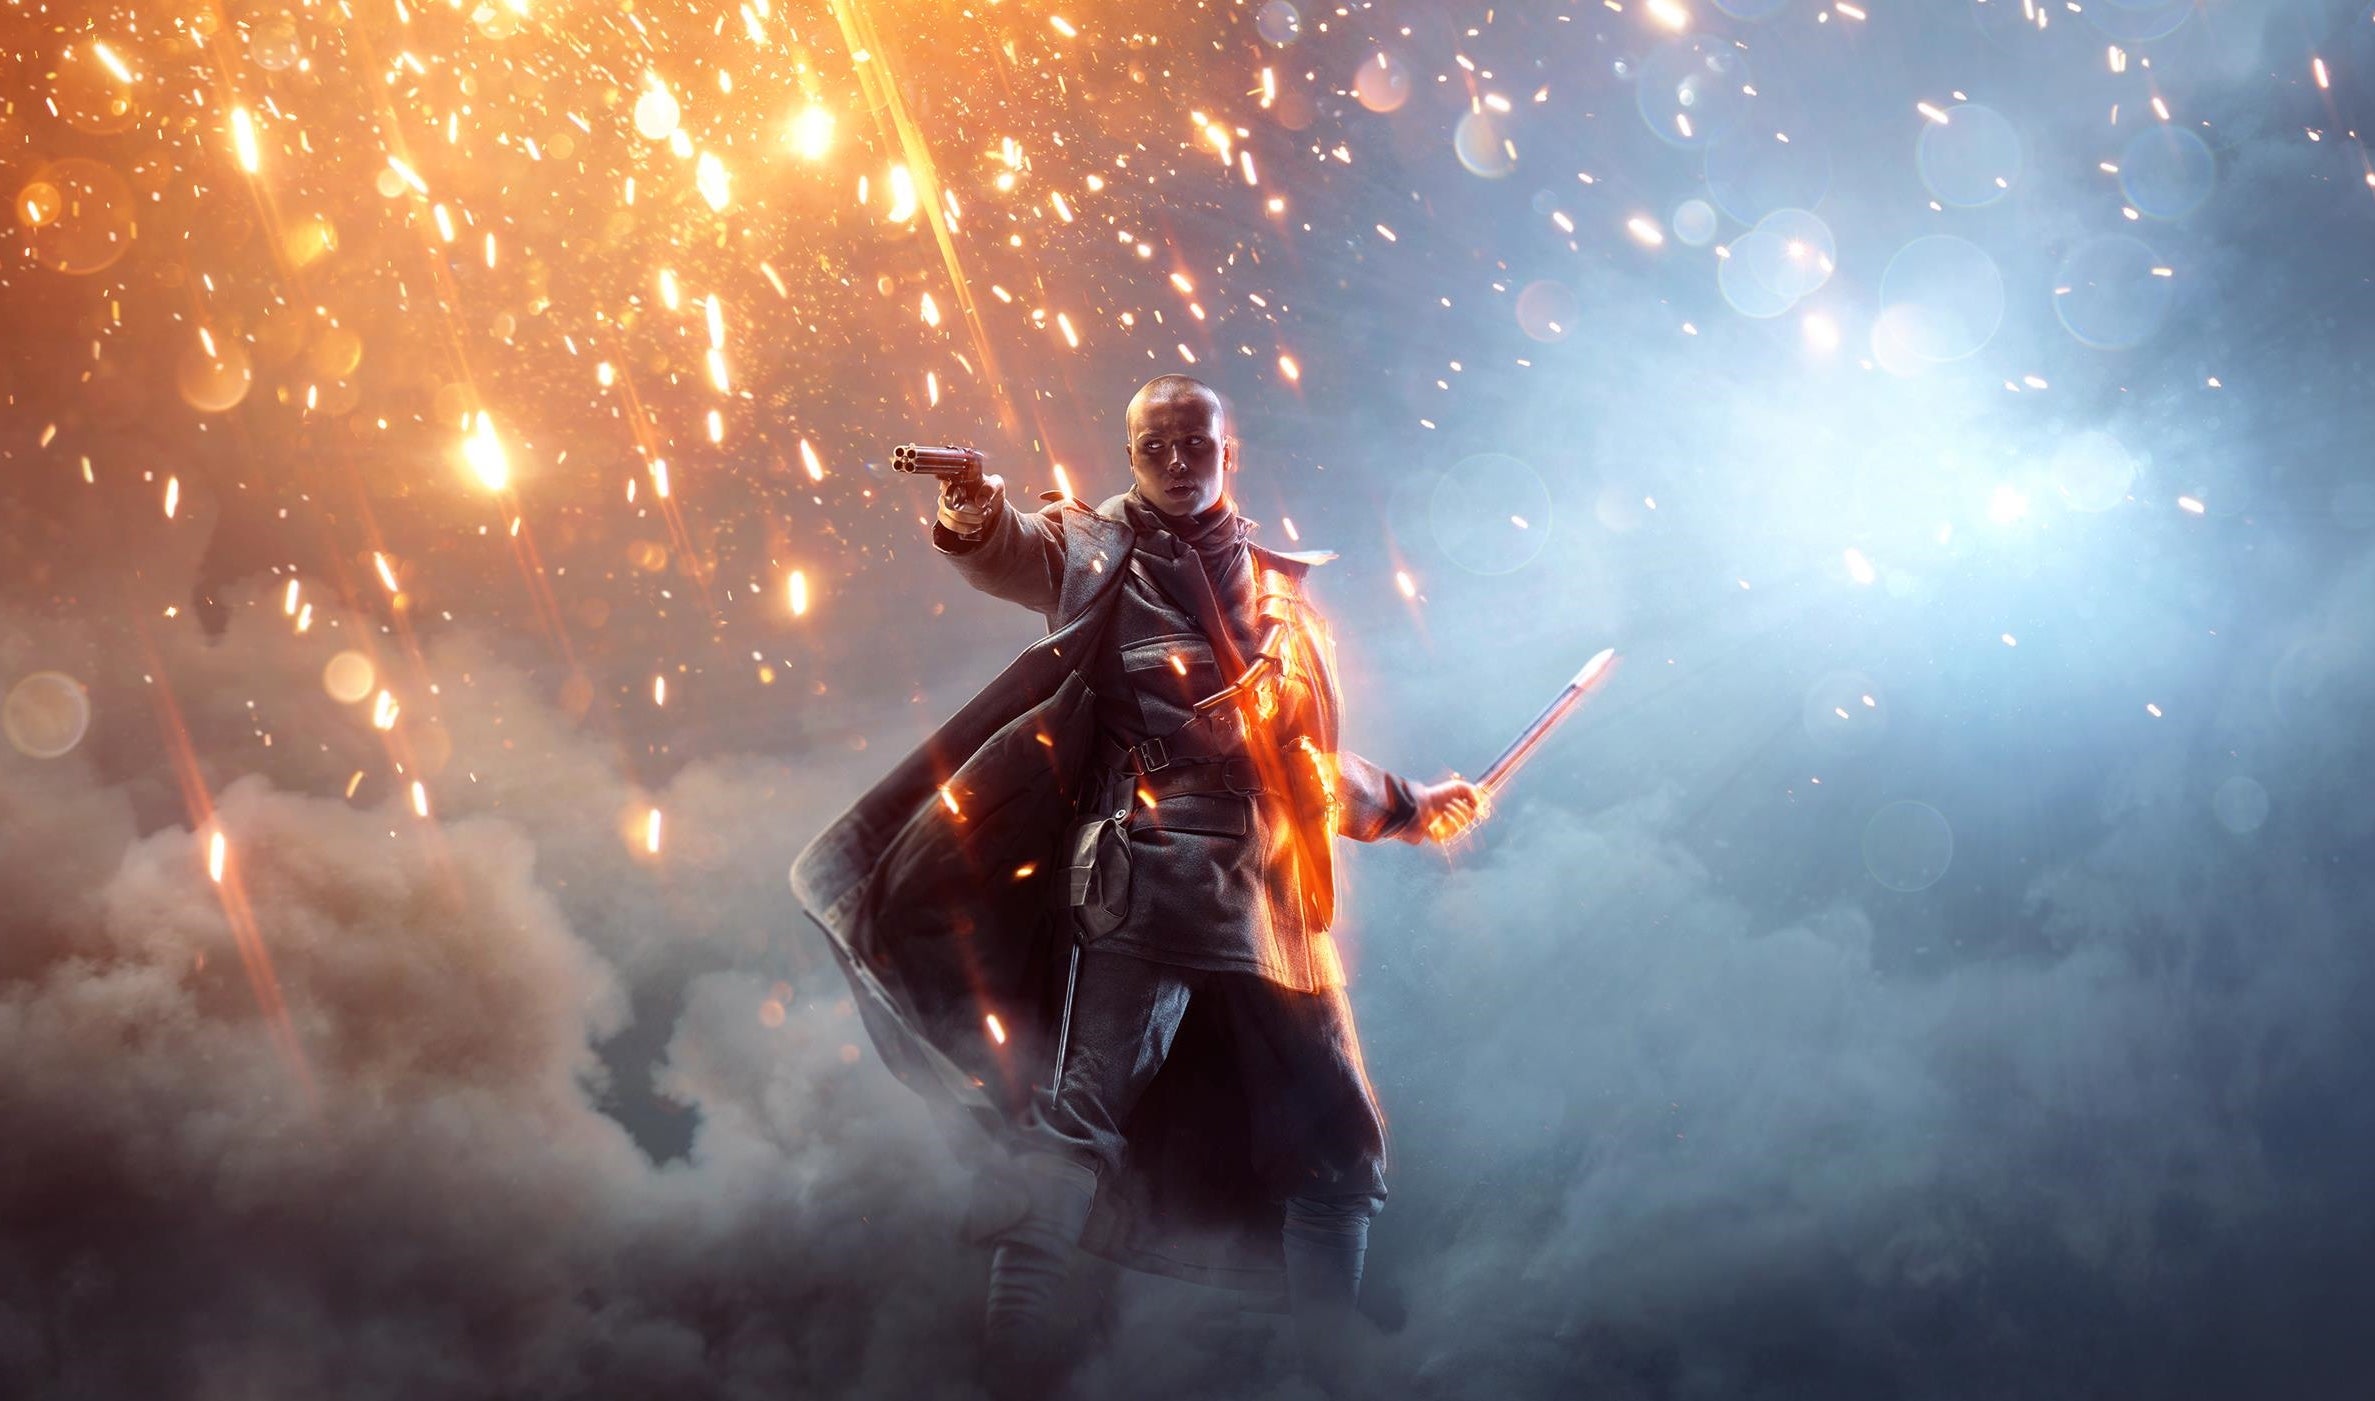 Battlefield 1 is getting Xbox One X support in upcoming summer patch | VG247